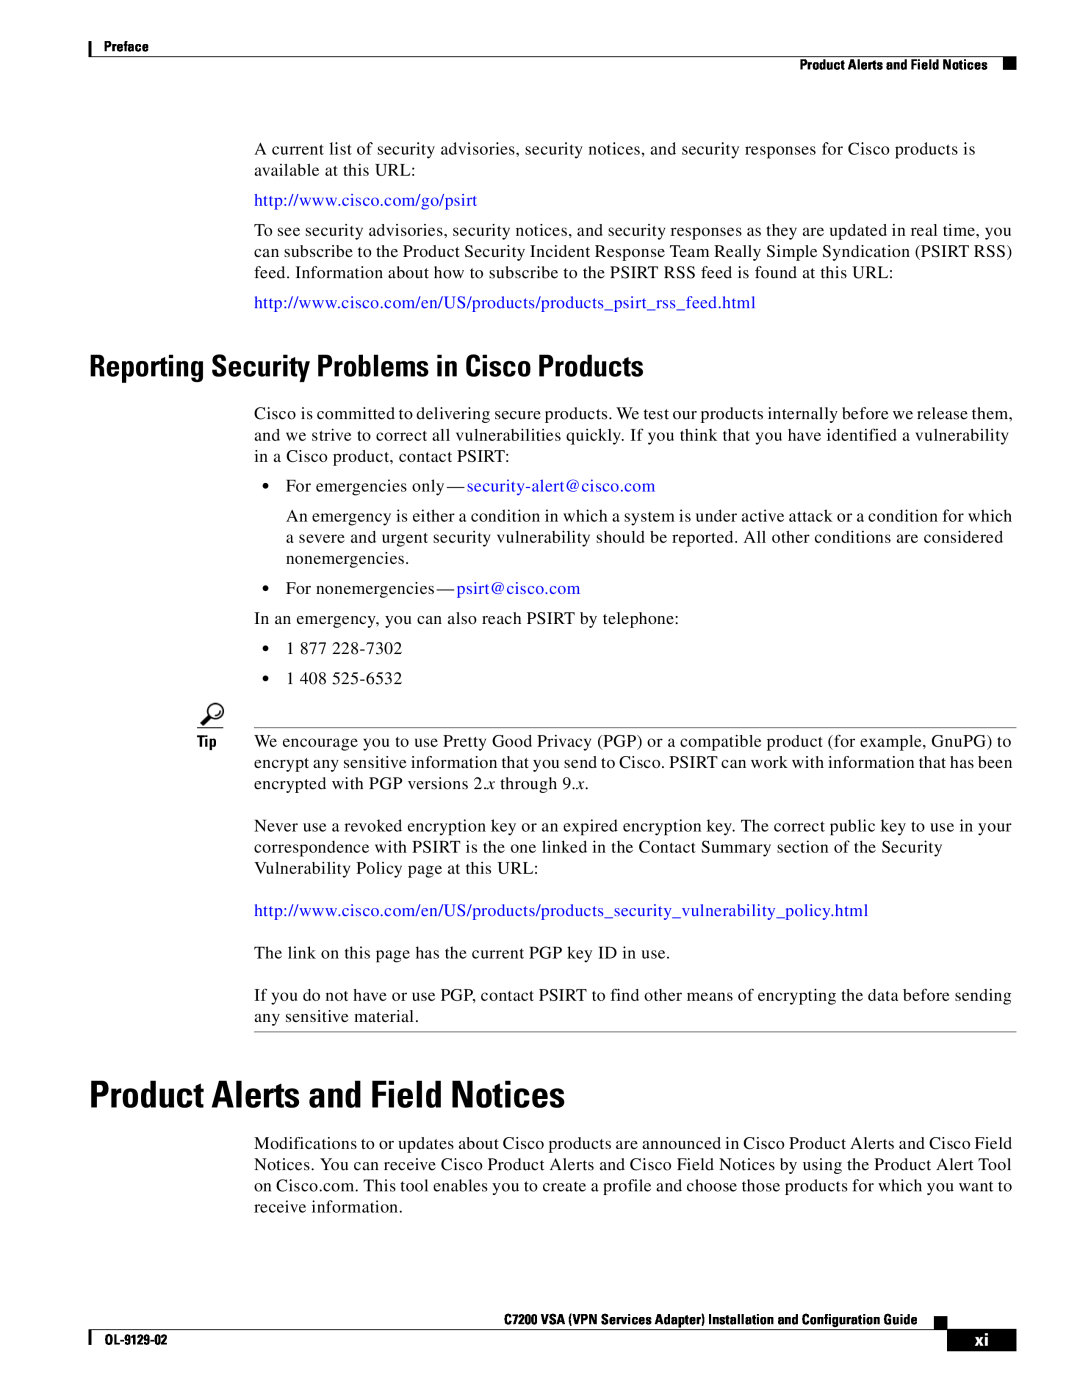 Cisco Systems C7200 manual Product Alerts and Field Notices, Reporting Security Problems in Cisco Products 